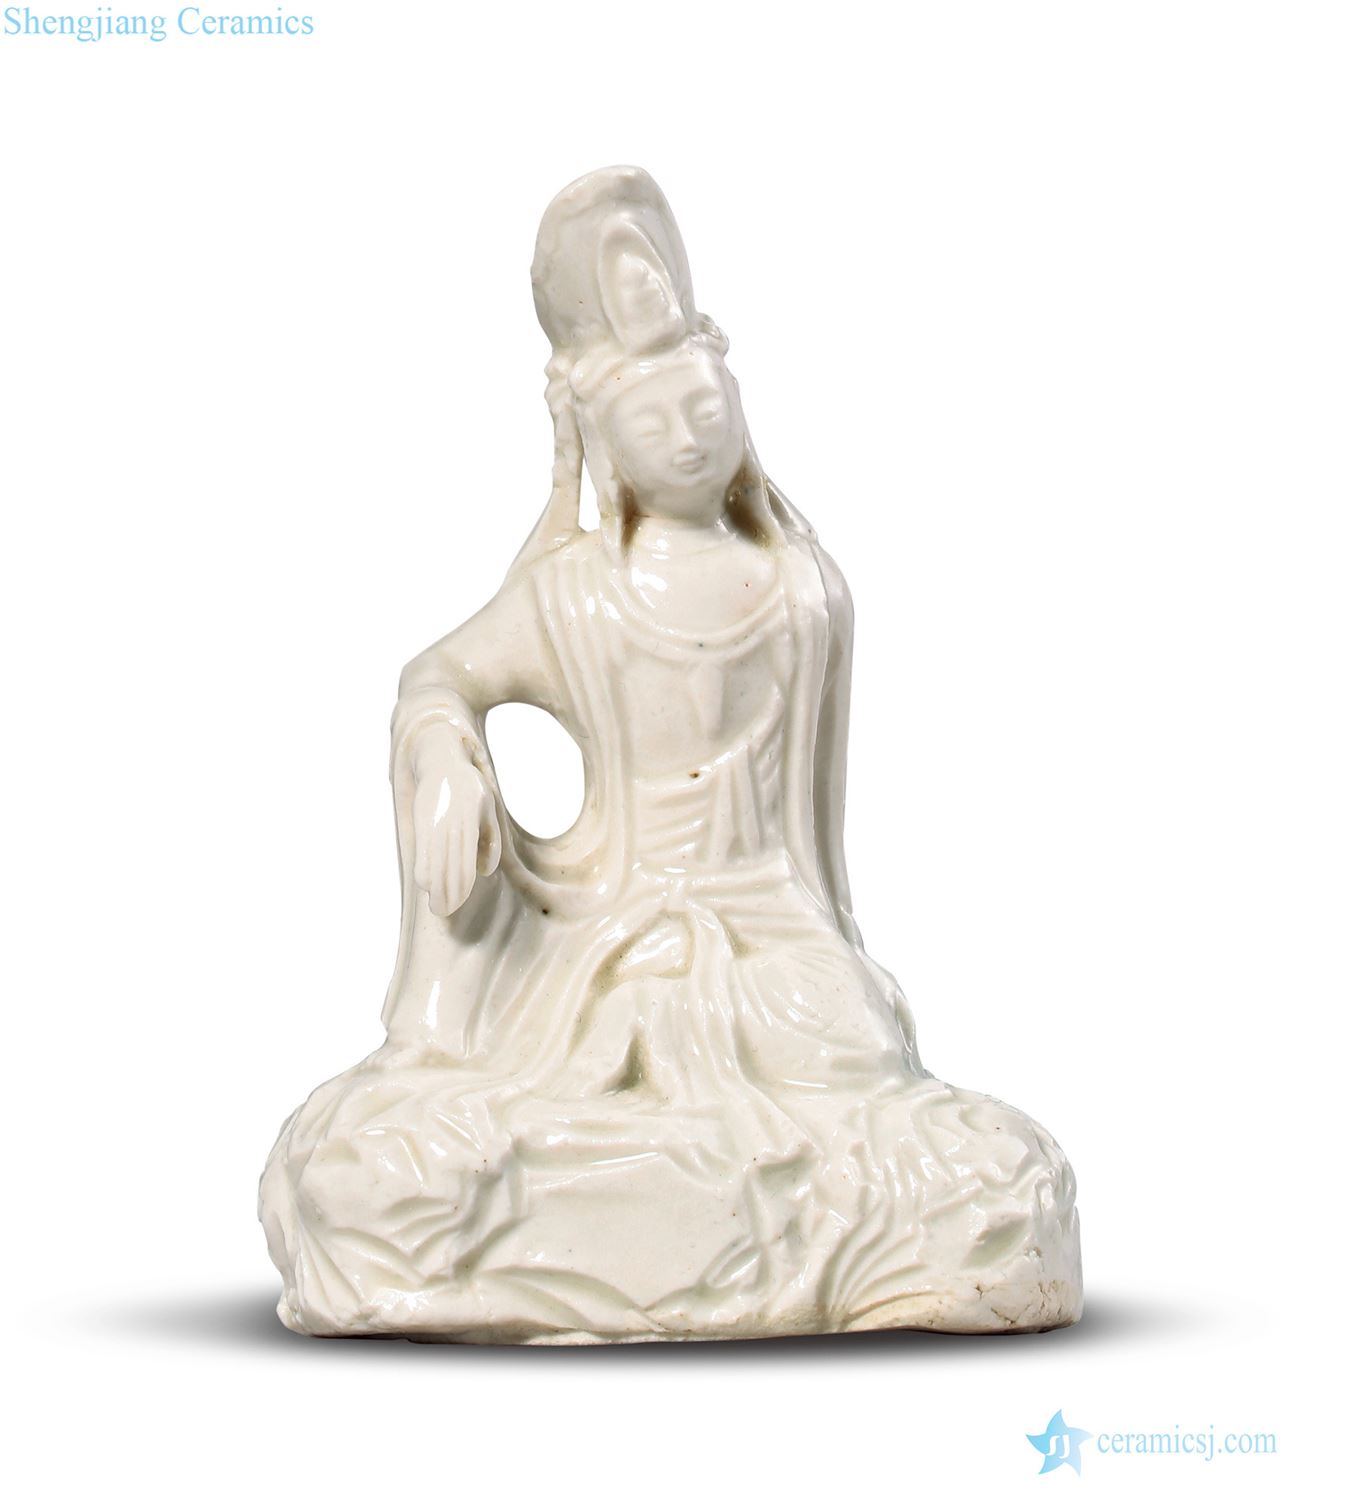 The song kiln guanyin to gold